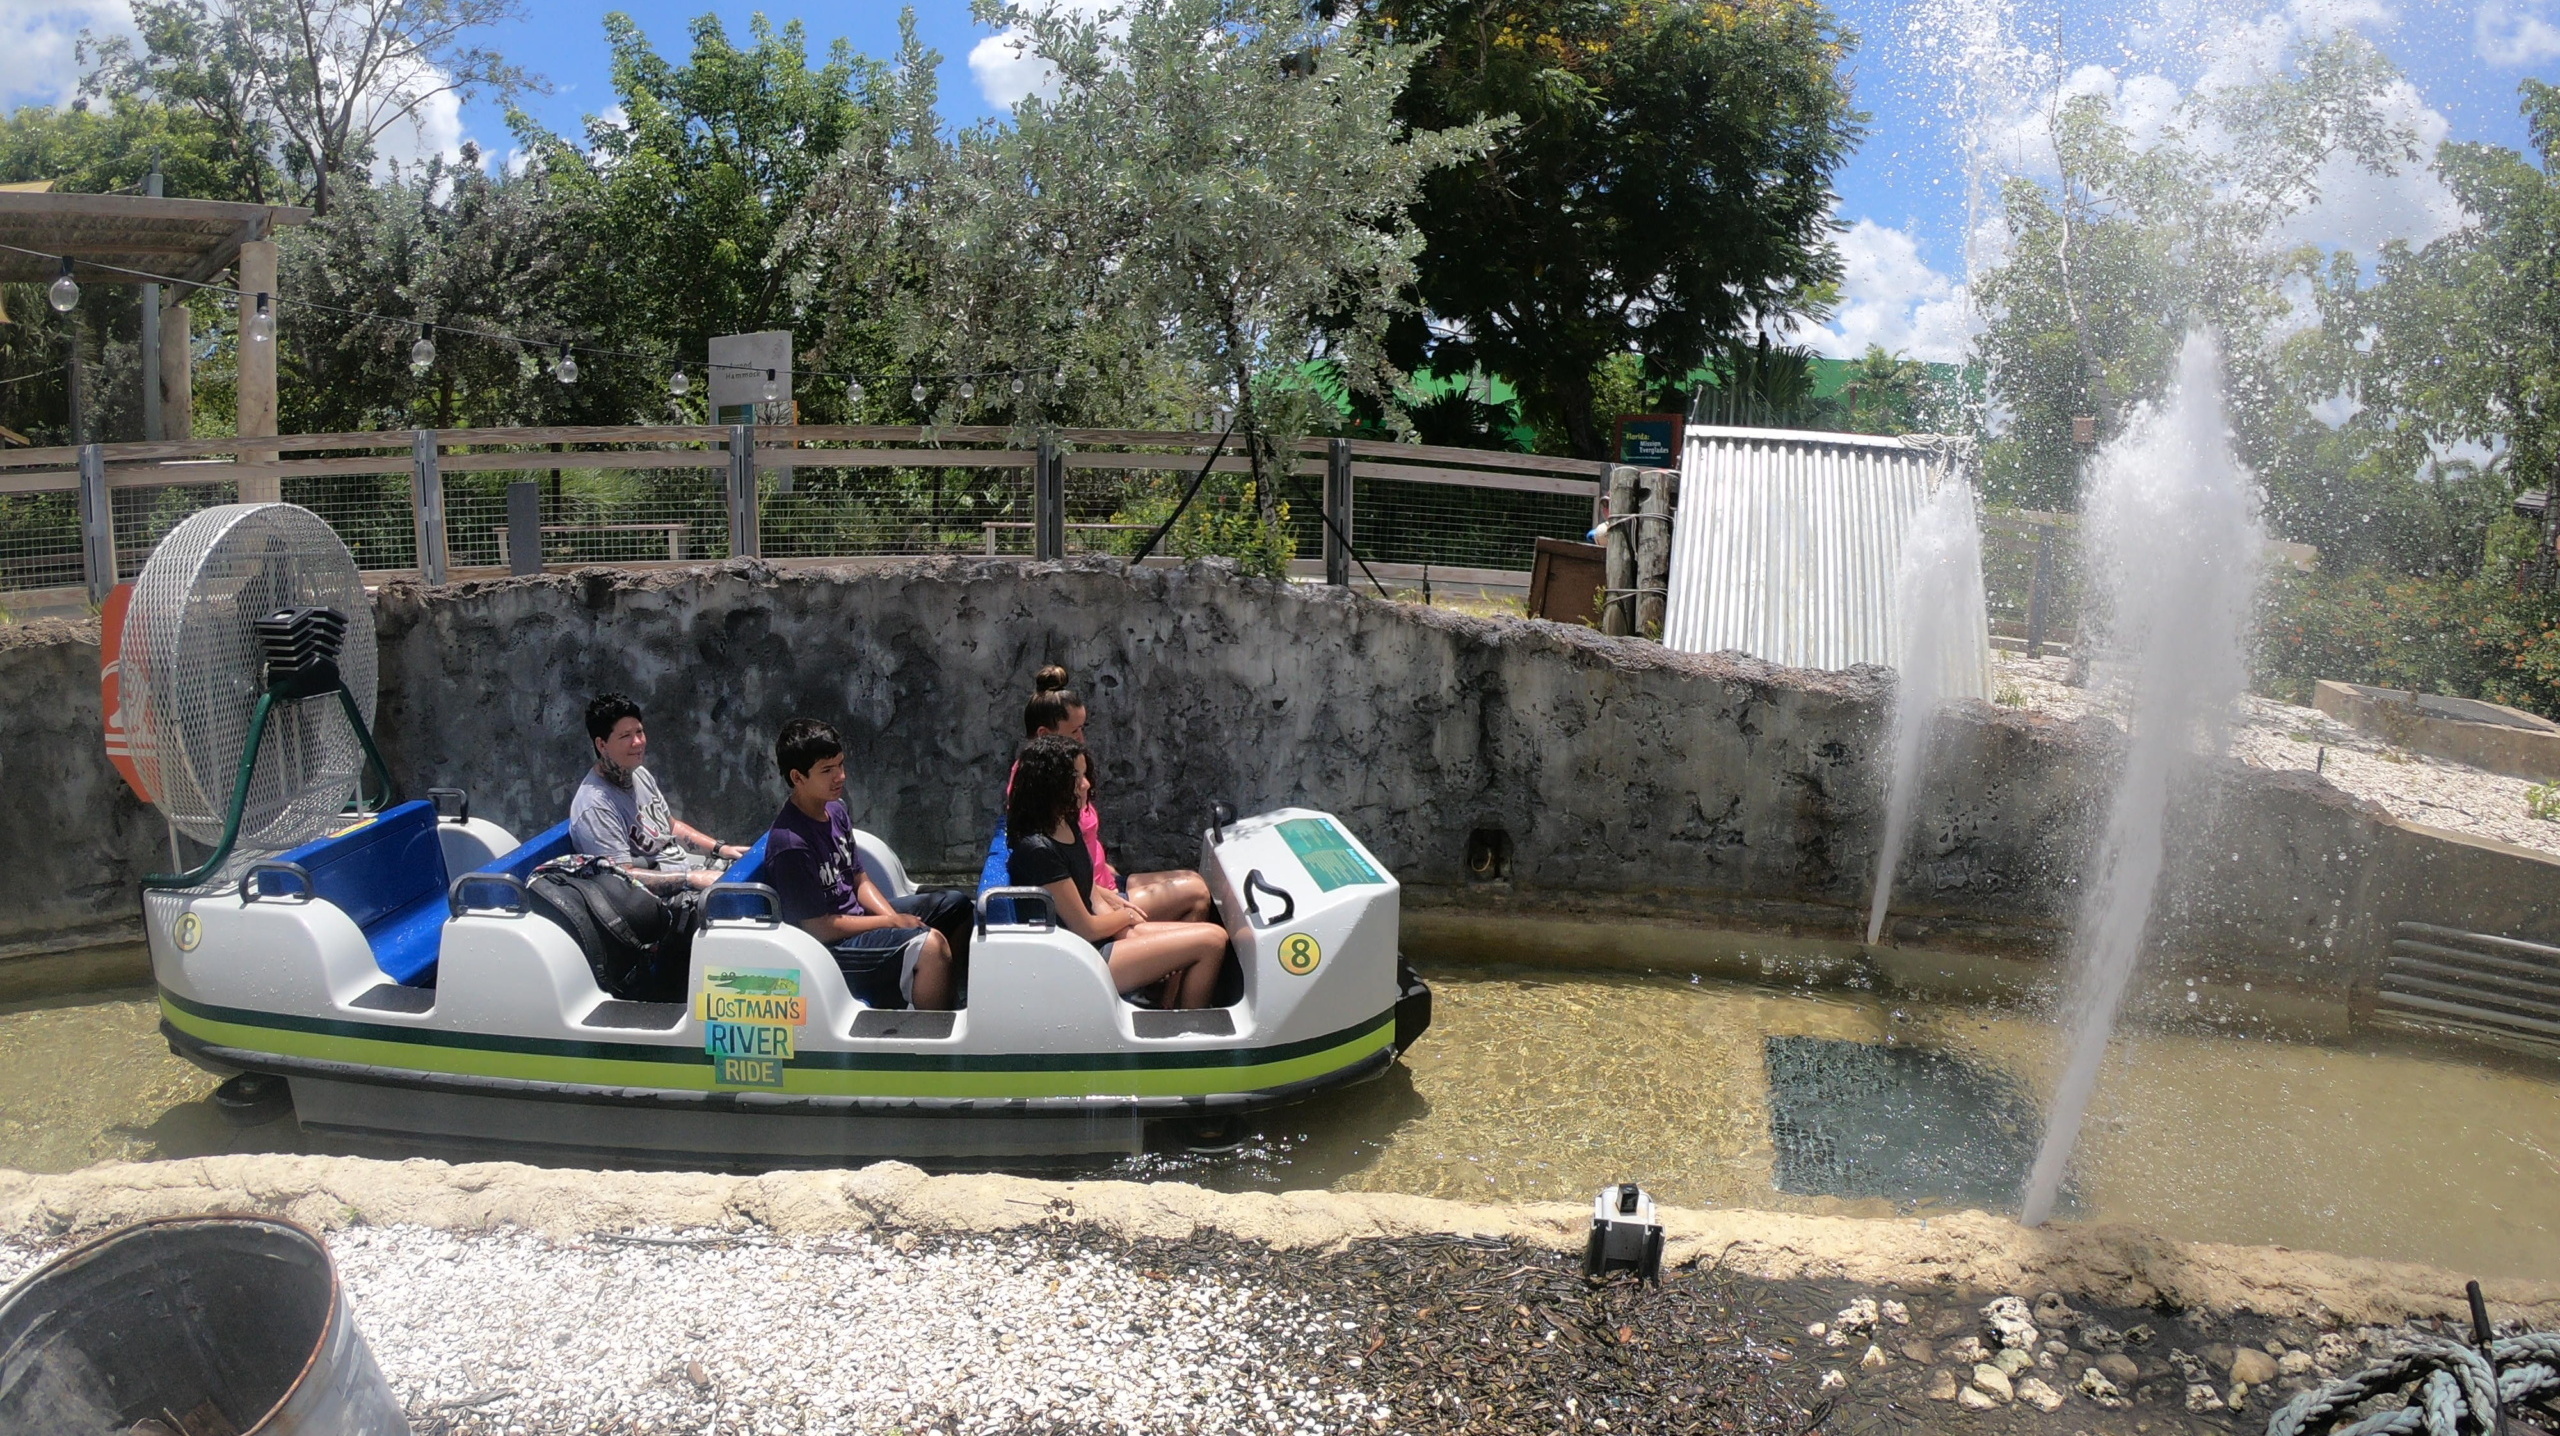 Passengers in water ride boat